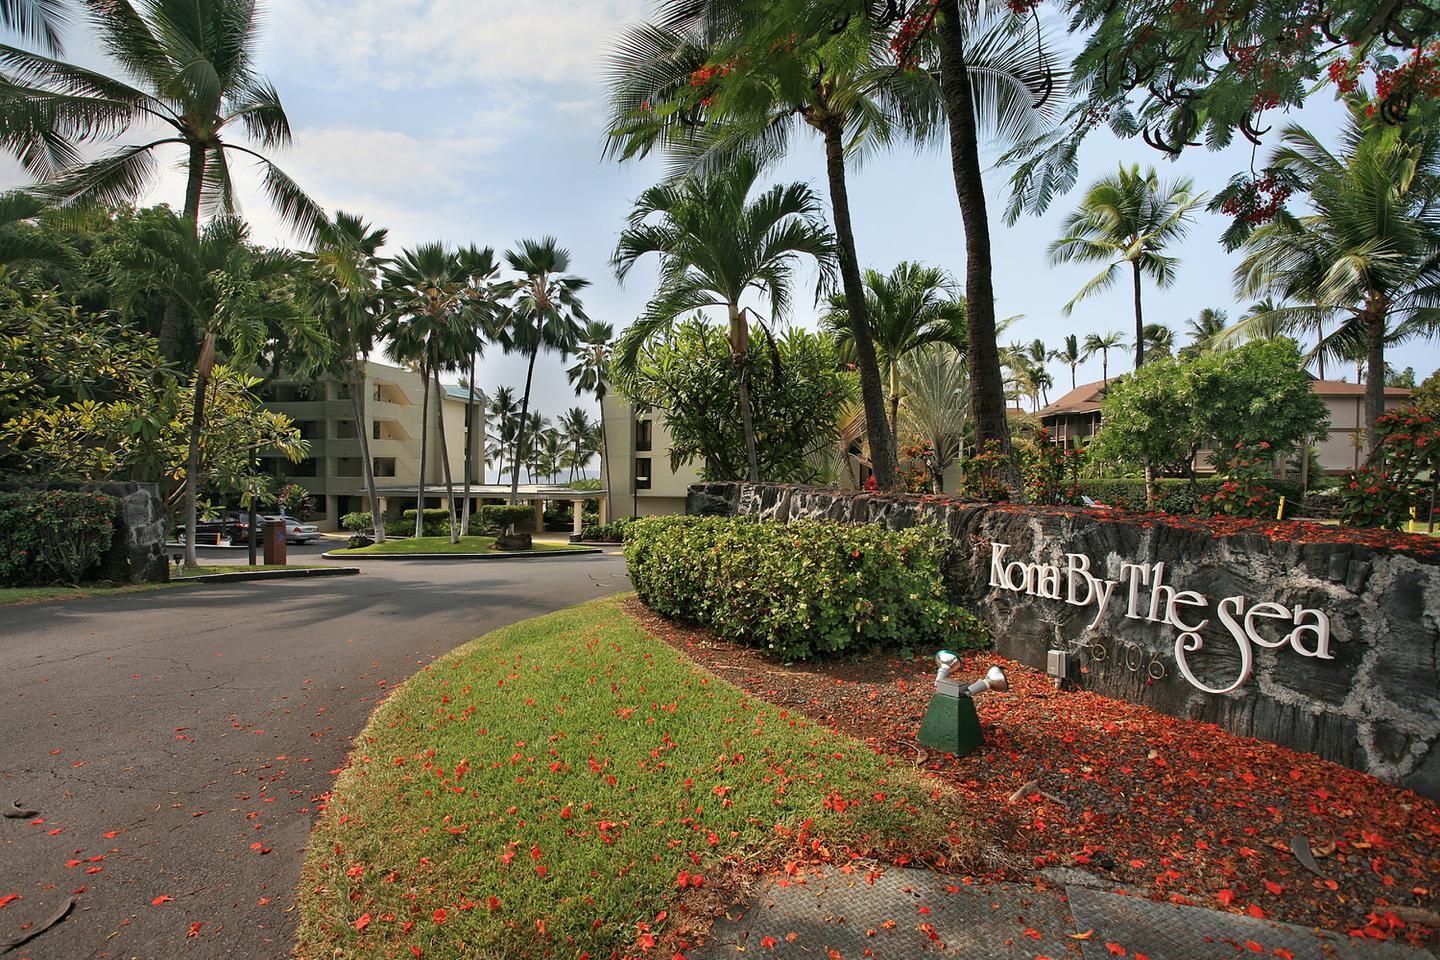 Driveway entrance to the resort with topical plants